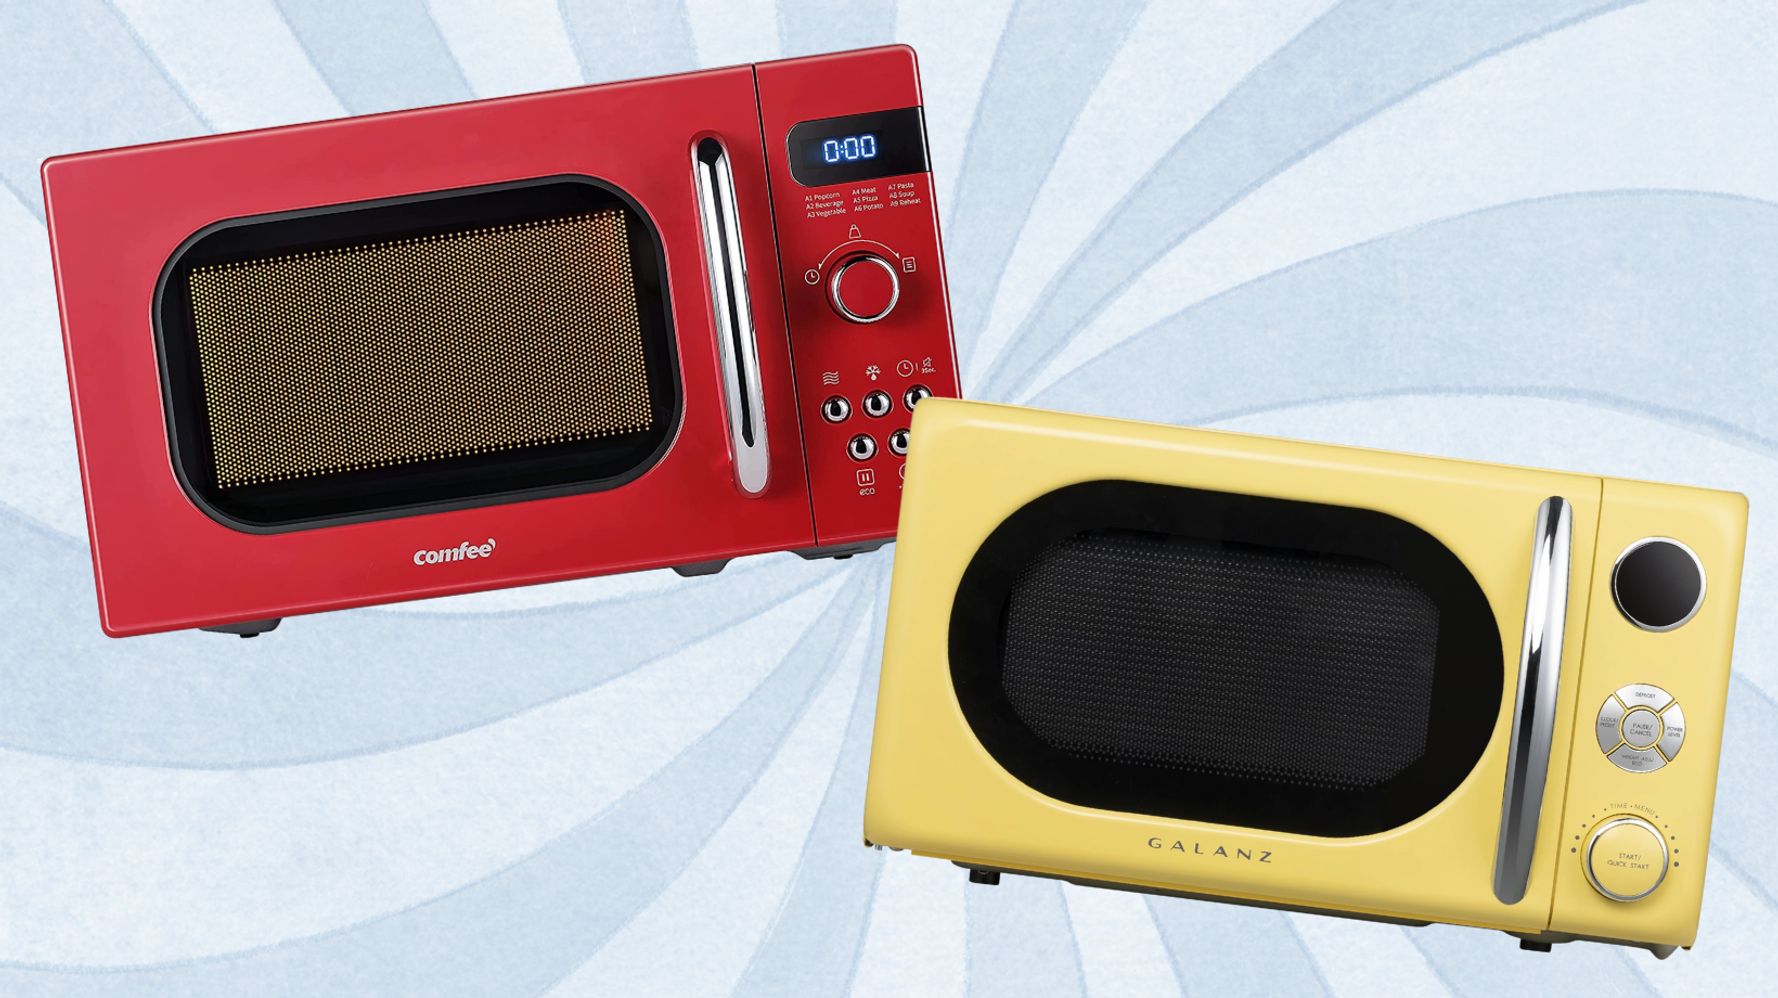 Cooking appliances ricopa in new colors --Fashionable microwave ovens,  mini hot plates, etc. []